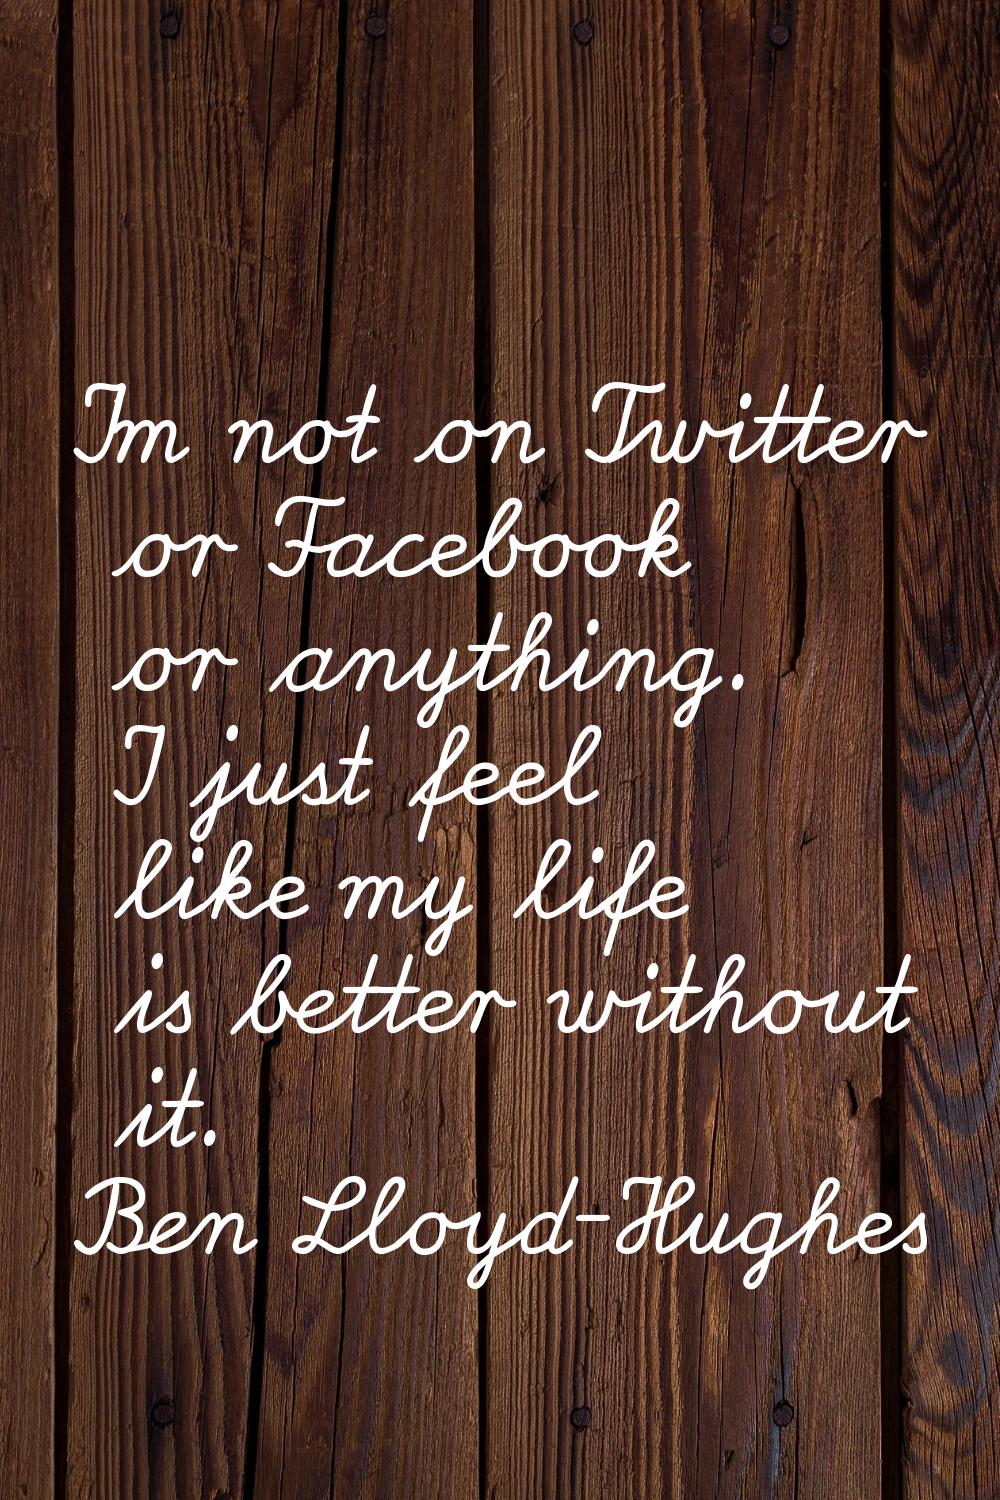 I'm not on Twitter or Facebook or anything. I just feel like my life is better without it.